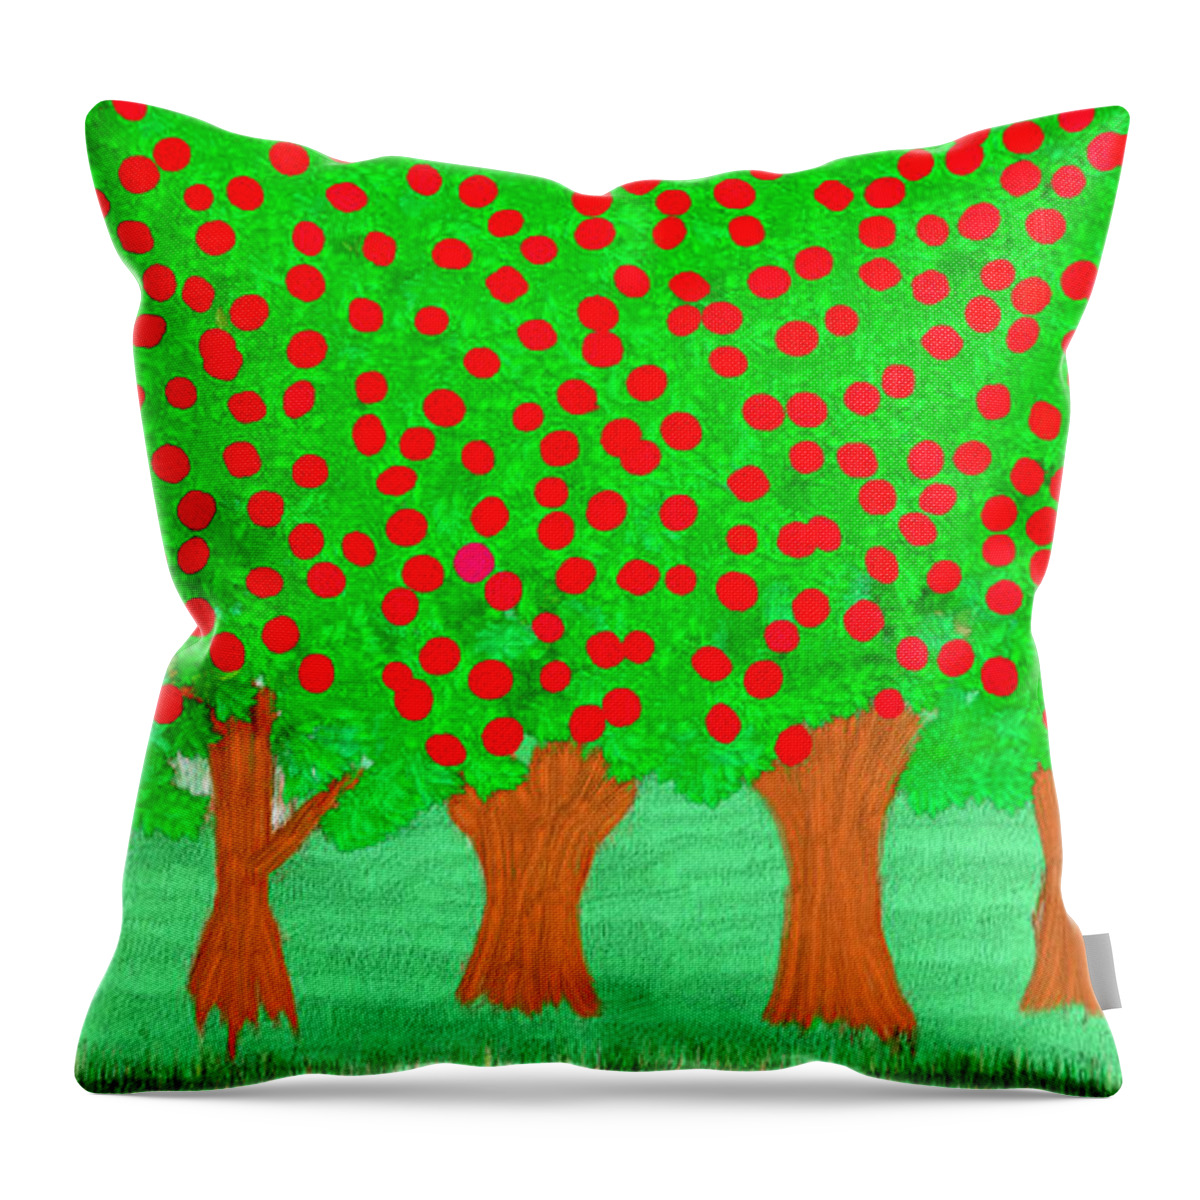 Orchard Throw Pillow featuring the painting Apple Orchard Ready to Pick by Bruce Nutting